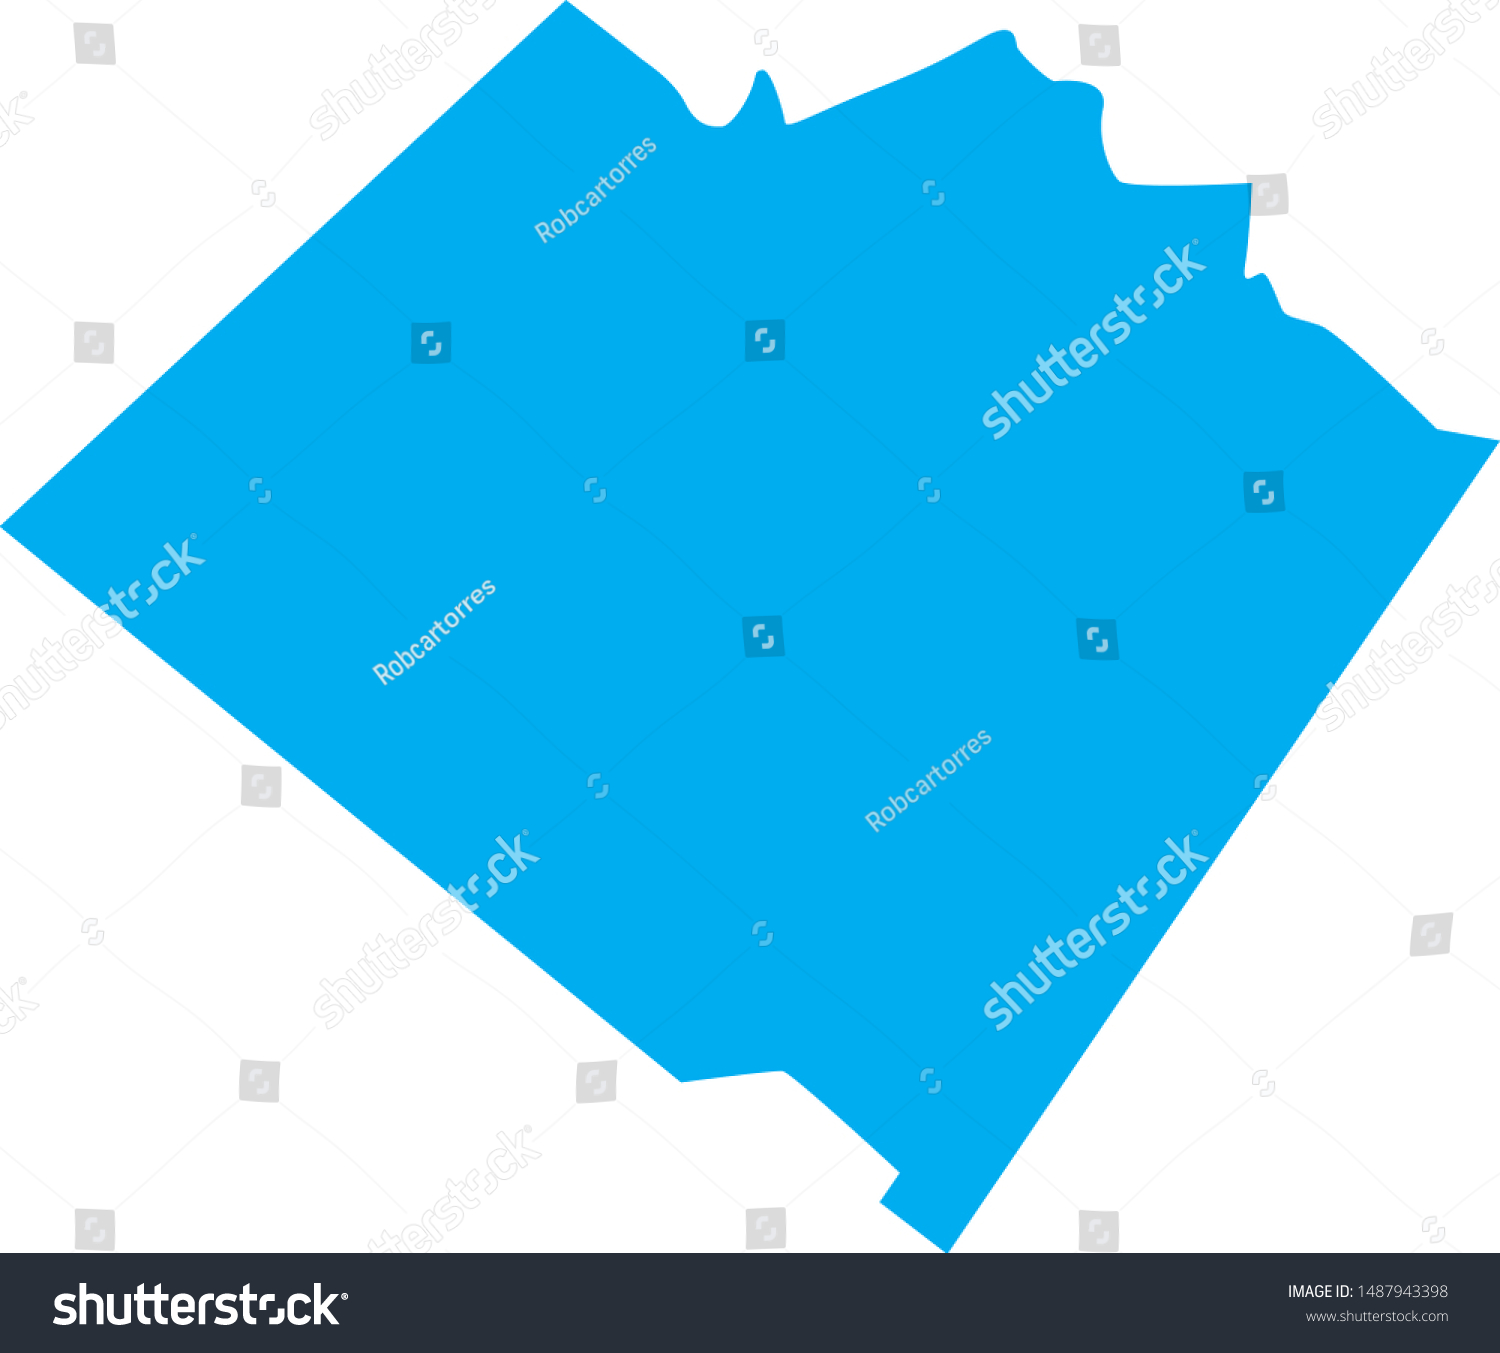 Map Of Walton County In Georgia State In Usa Royalty Free Stock Vector 1487943398 9084